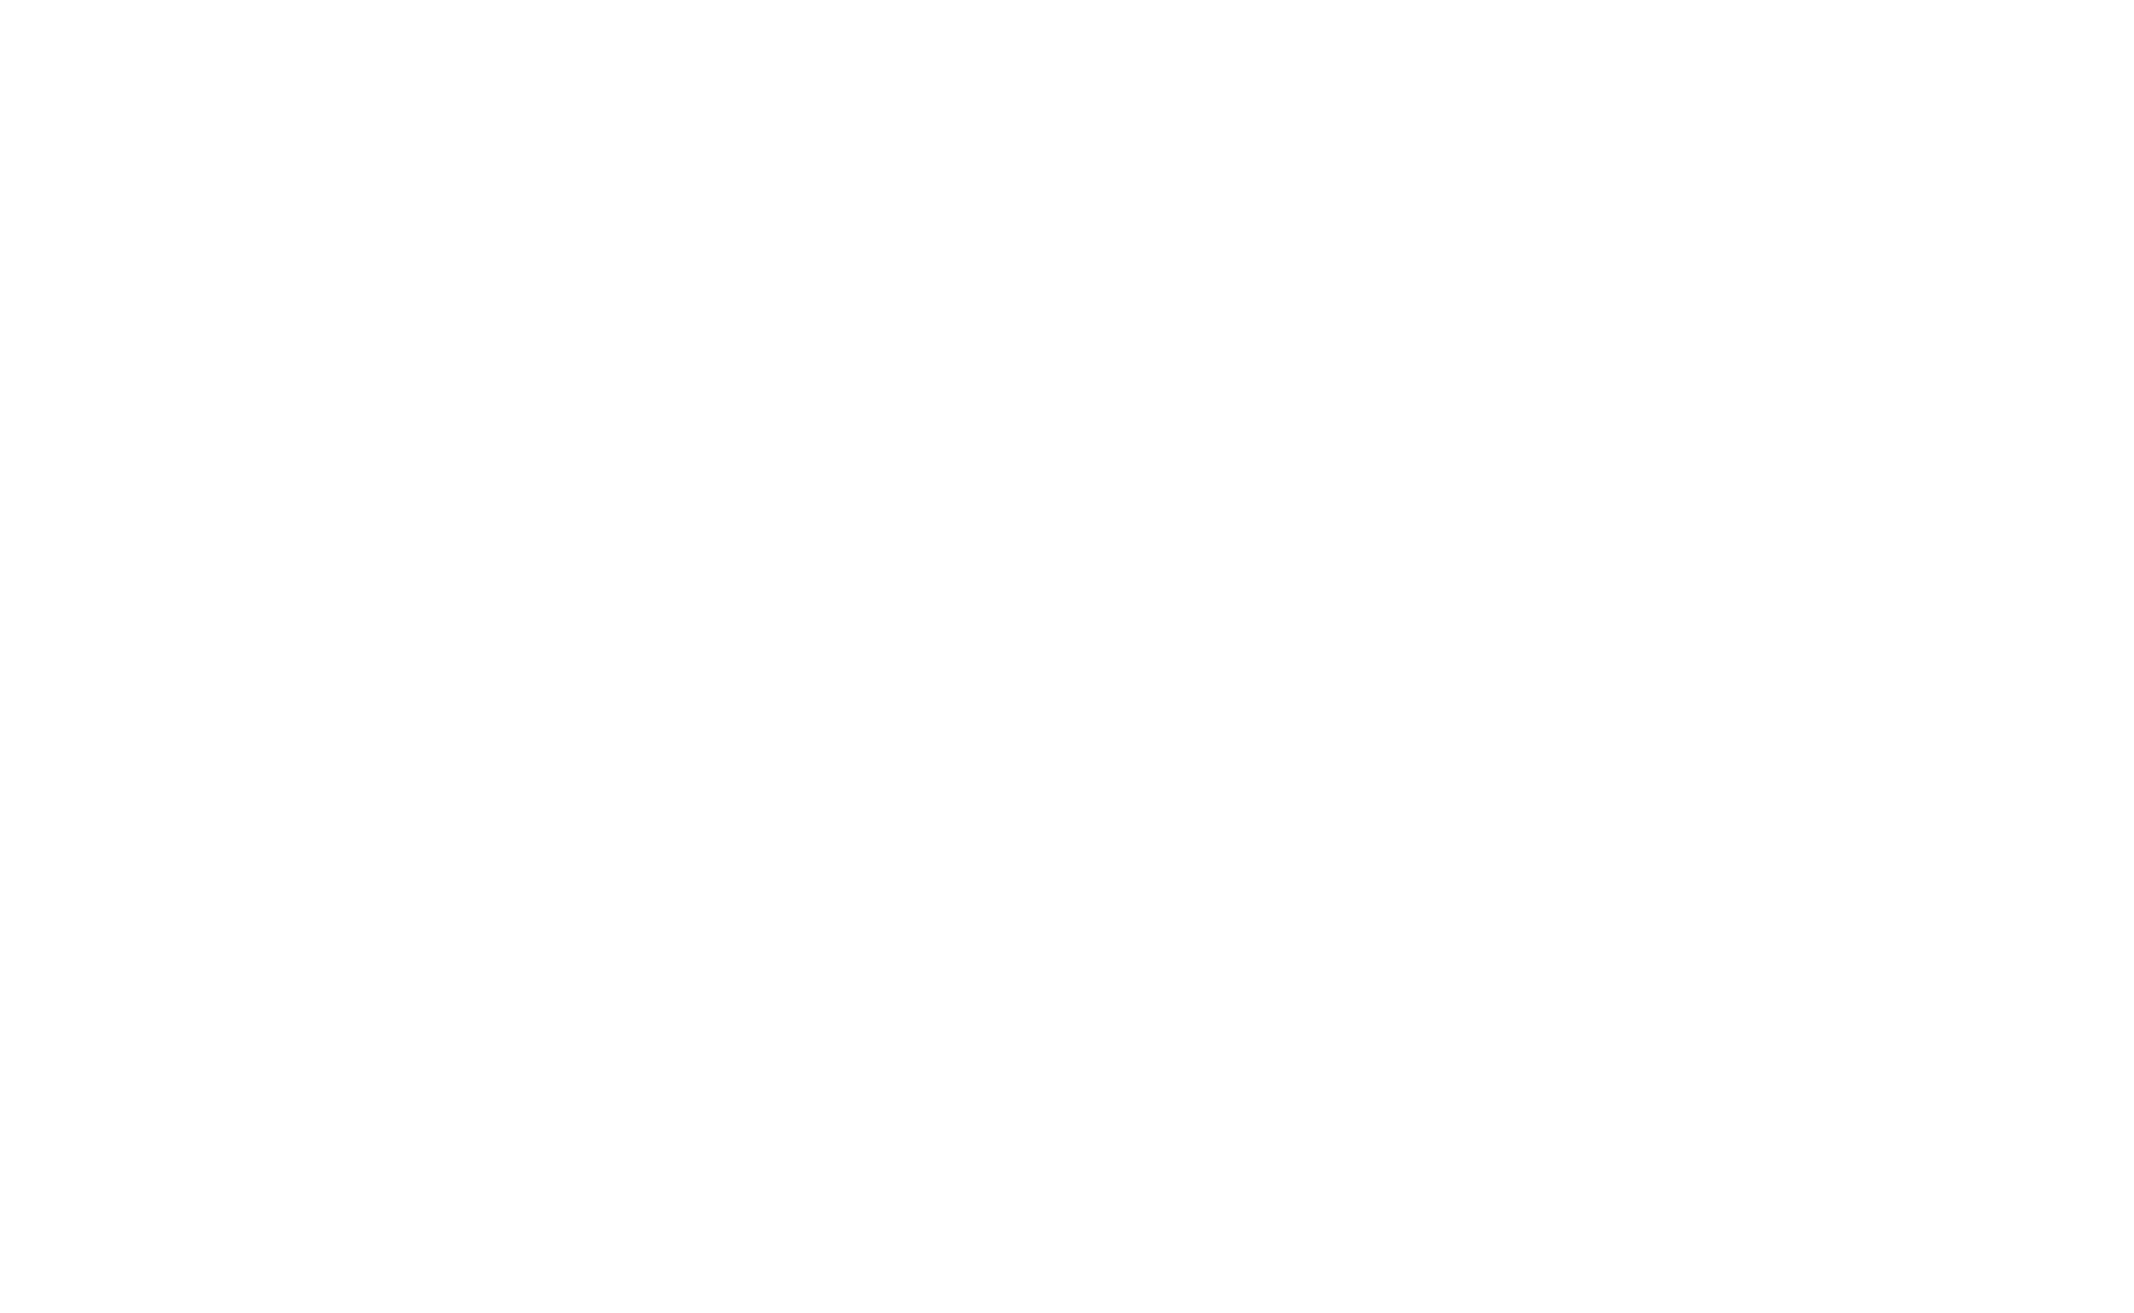 Ministry Of Sport